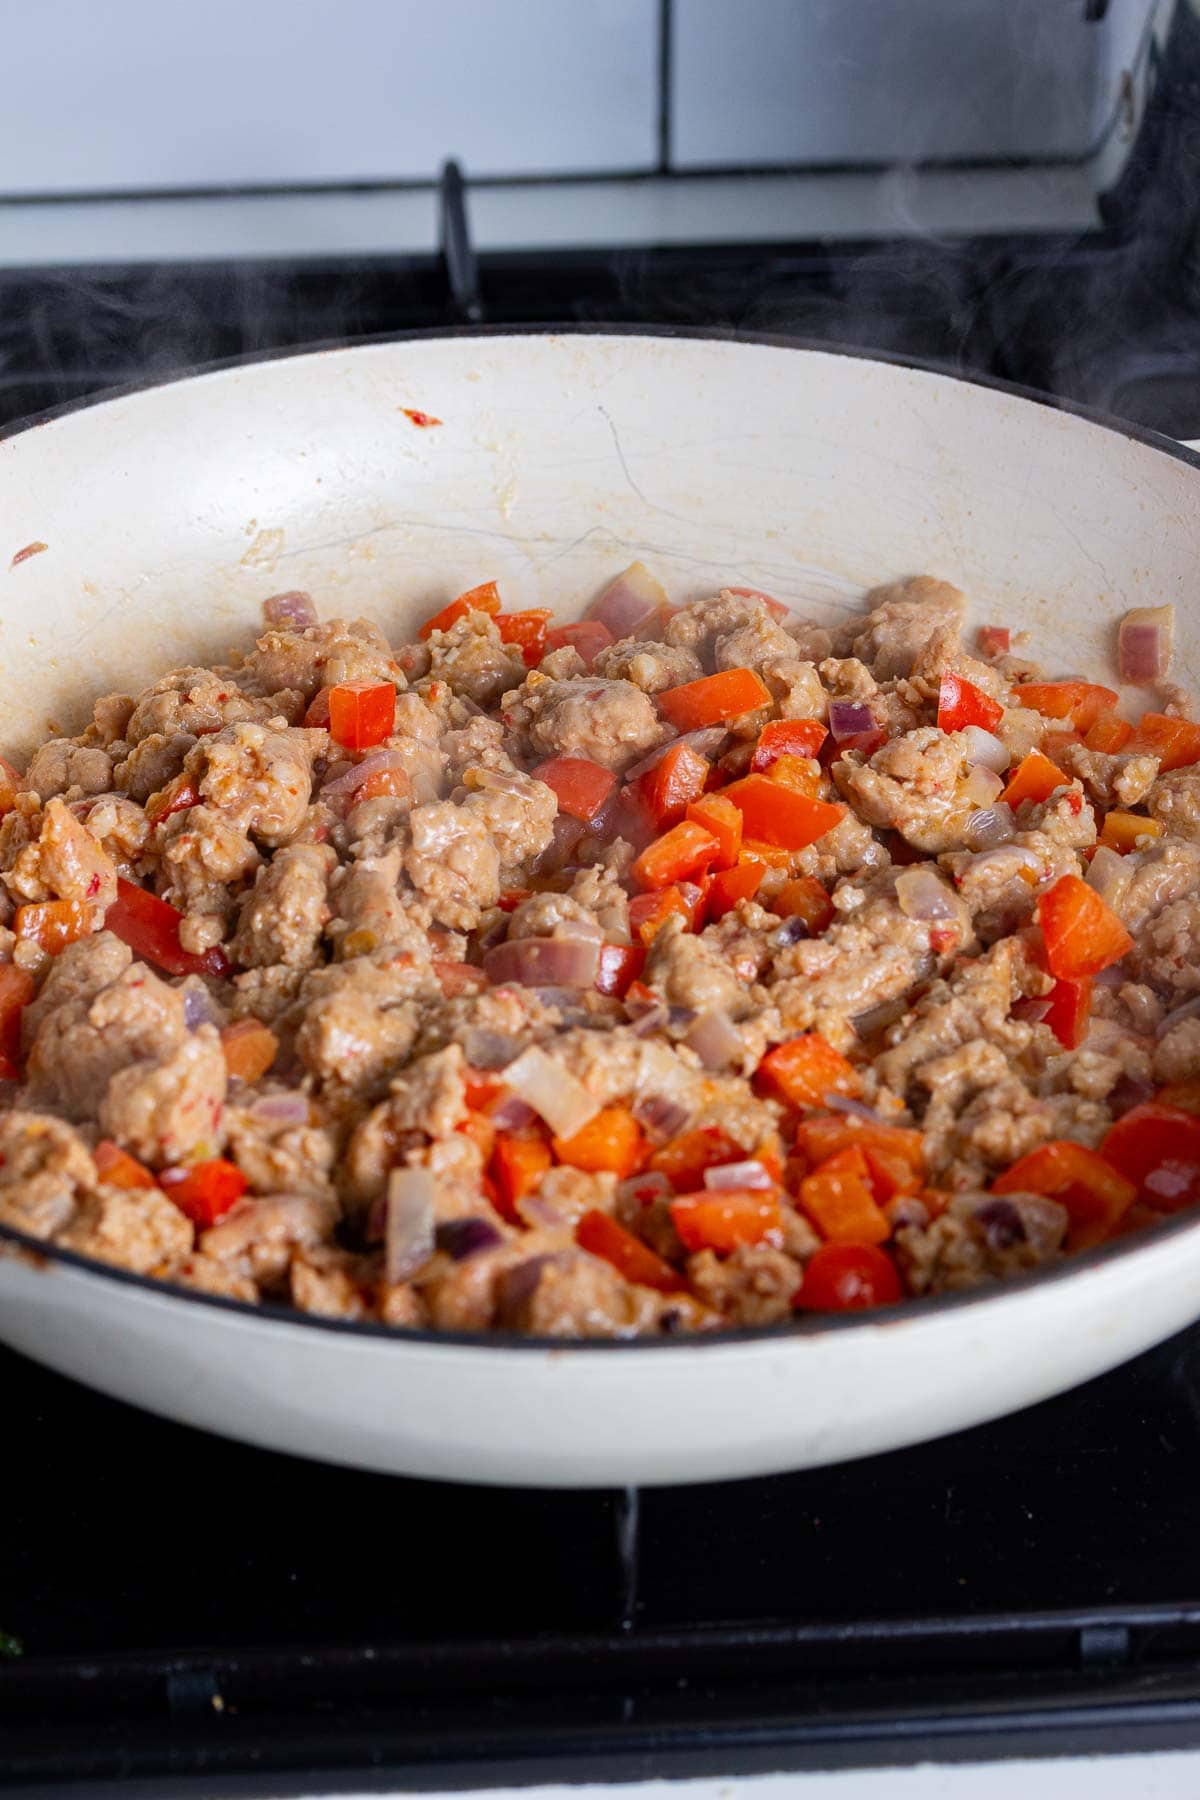 Sausage and vegetables in a pot